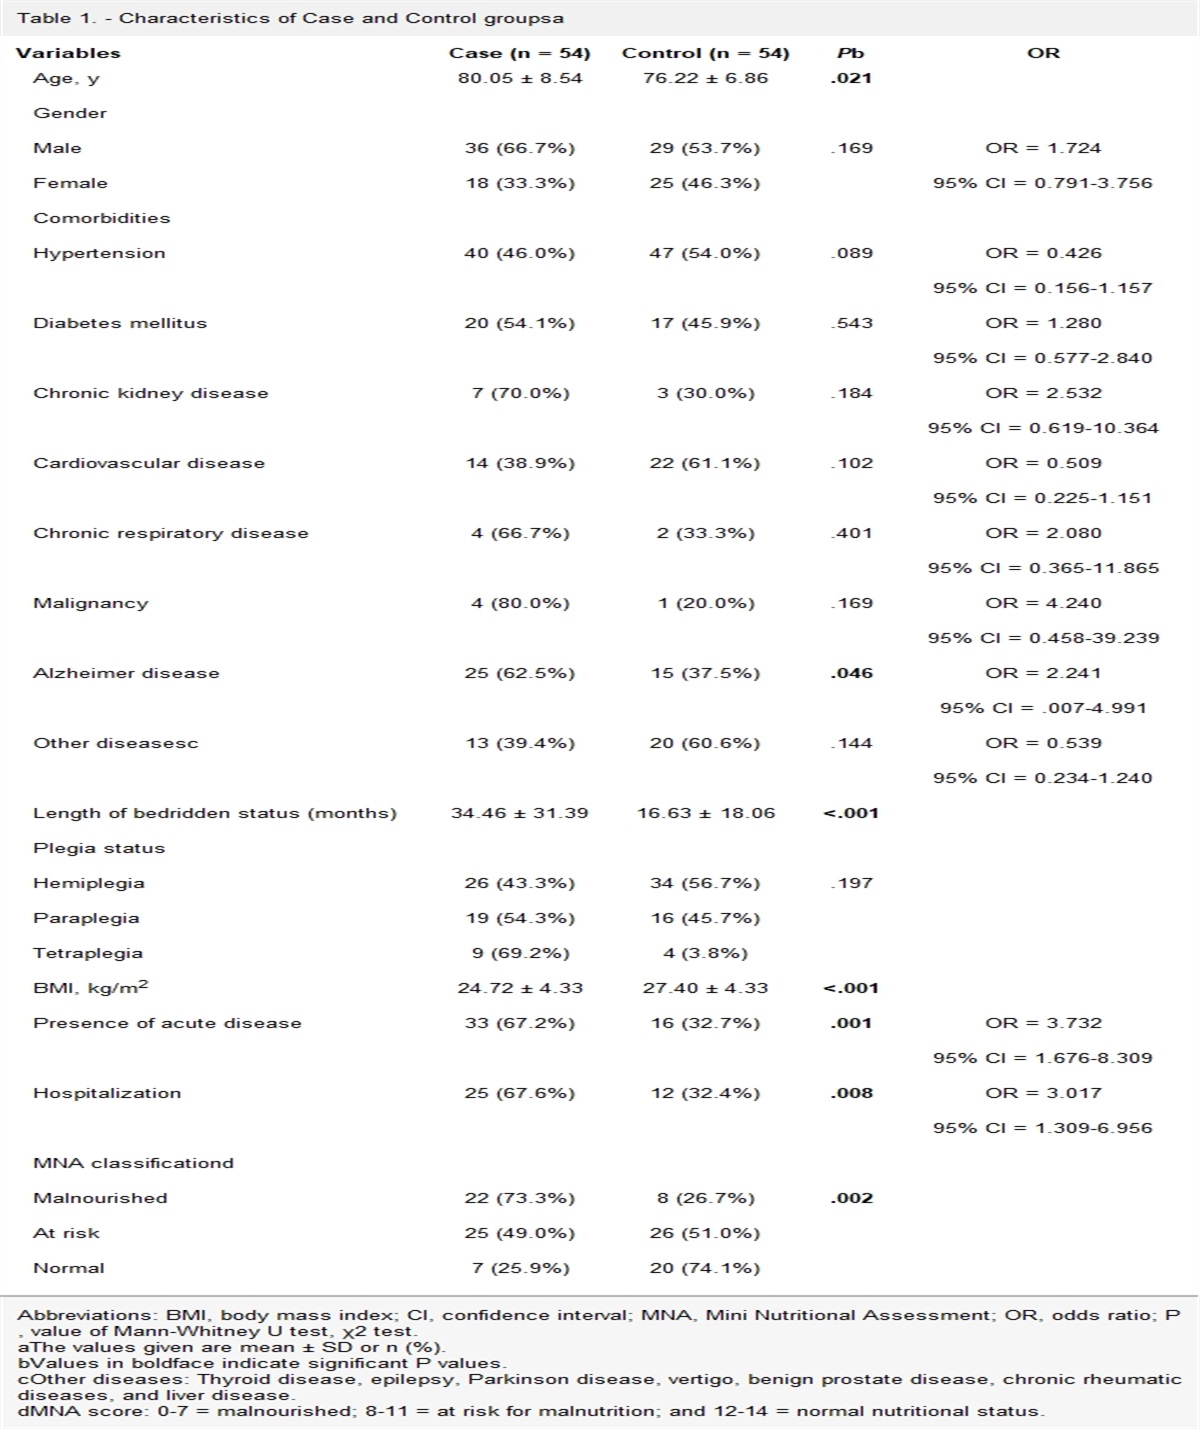 Mini Nutritional Assessment Score and Visceral Proteins as Potential Predictors of Pressure Injuries in Home Care Patients With Stroke